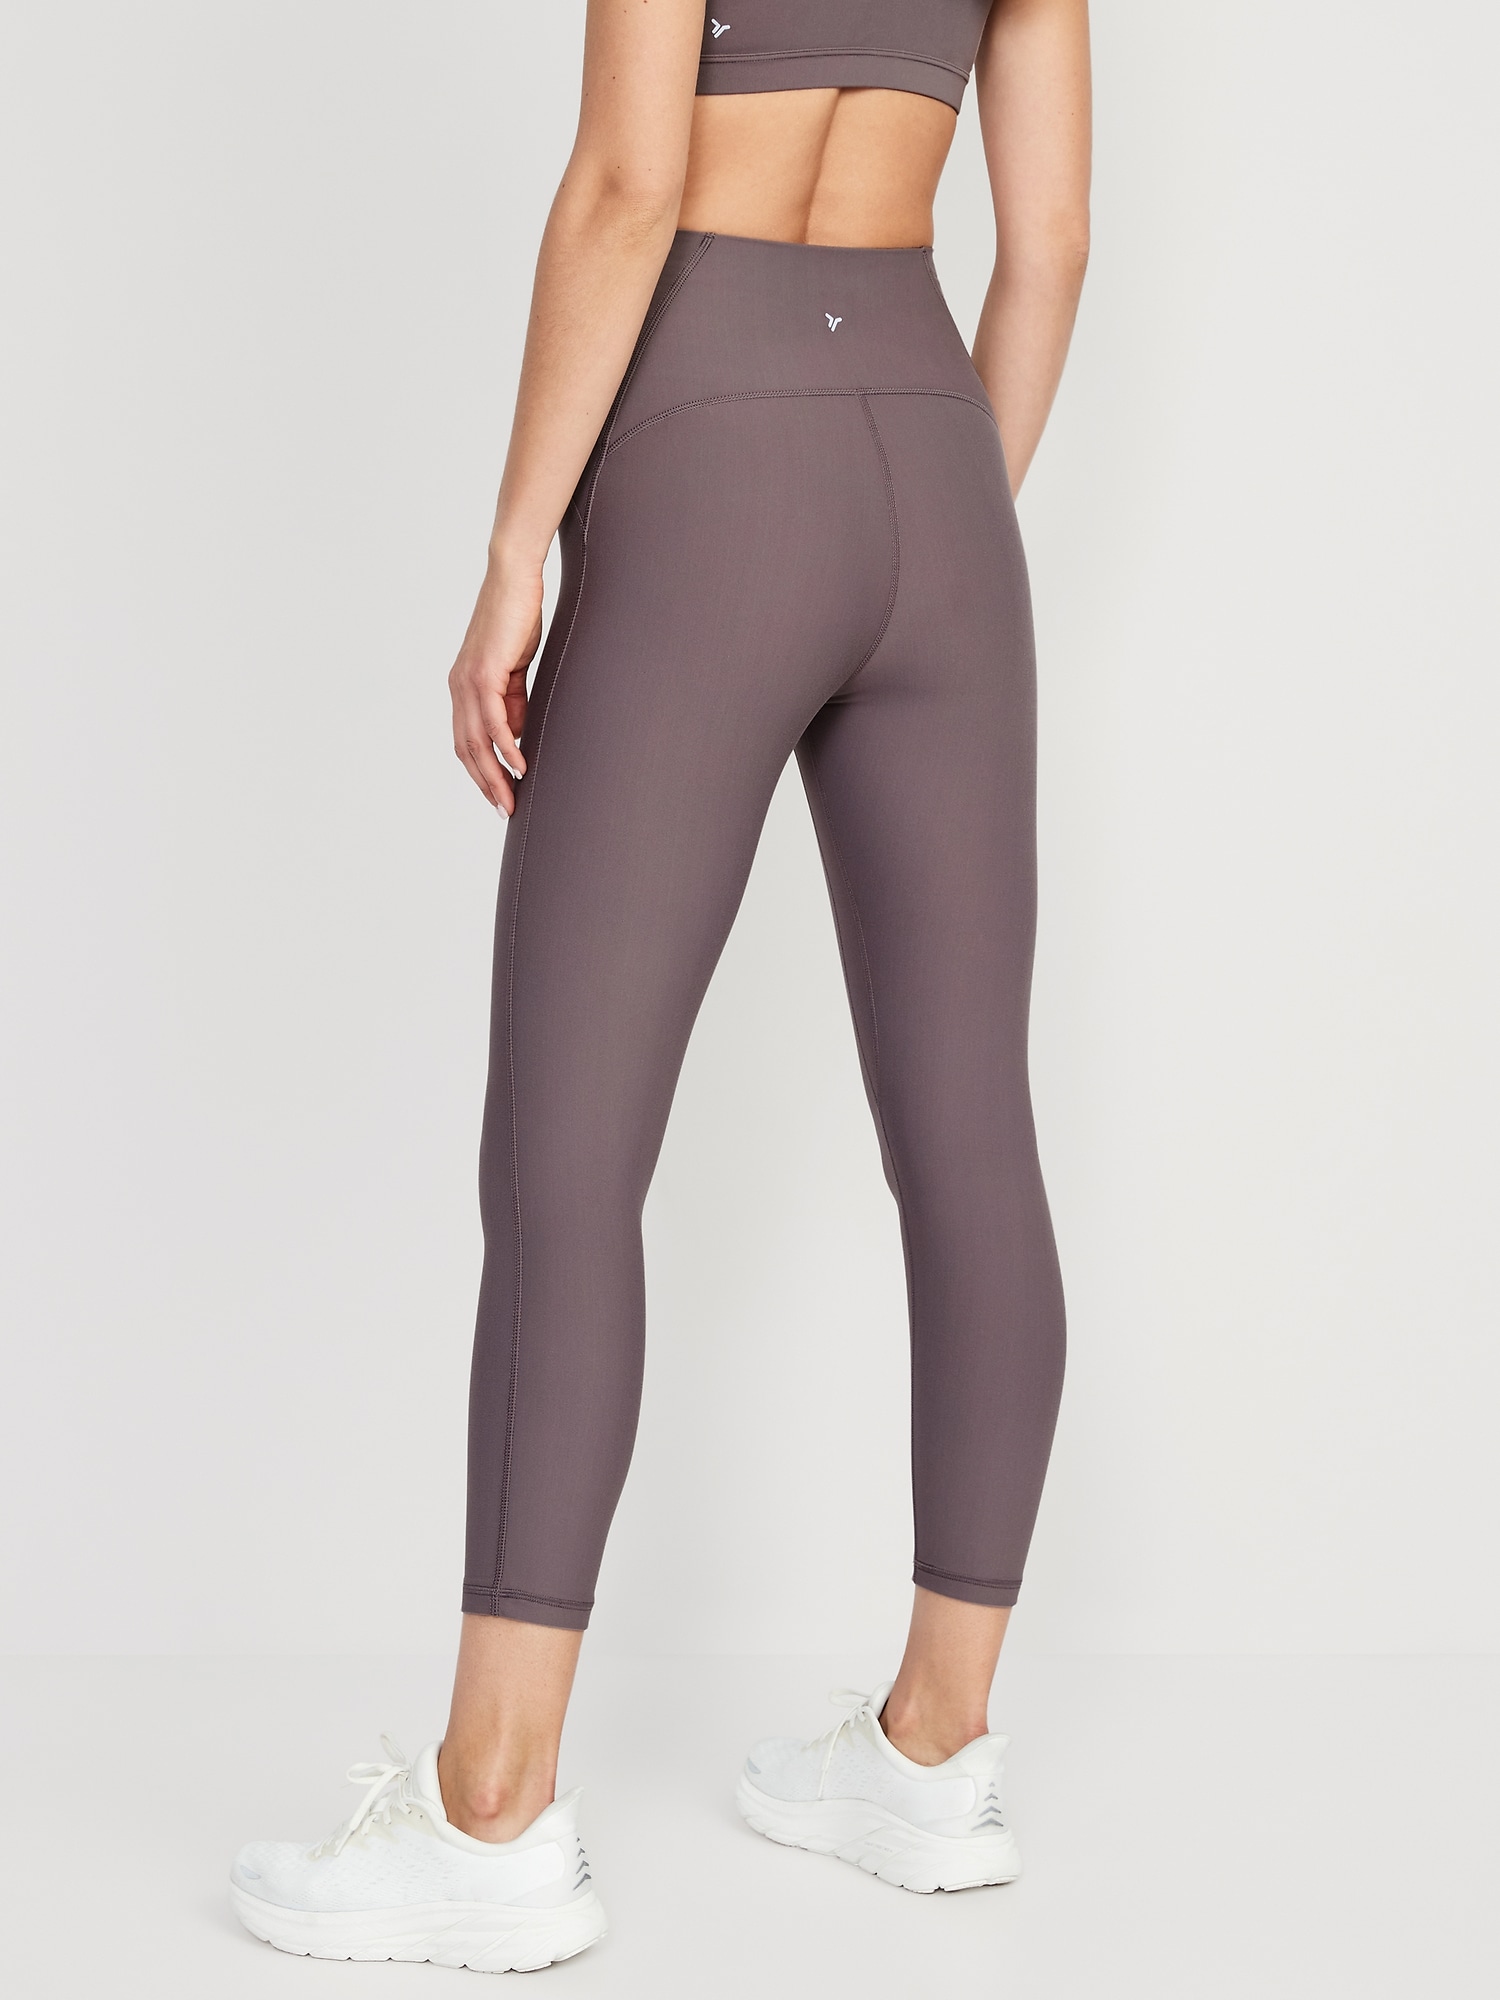 Old Navy Extra High-Waisted PowerLite Lycra® ADAPTIV Flare Leggings for  Women, Old Navy deals this week, Old Navy flyer